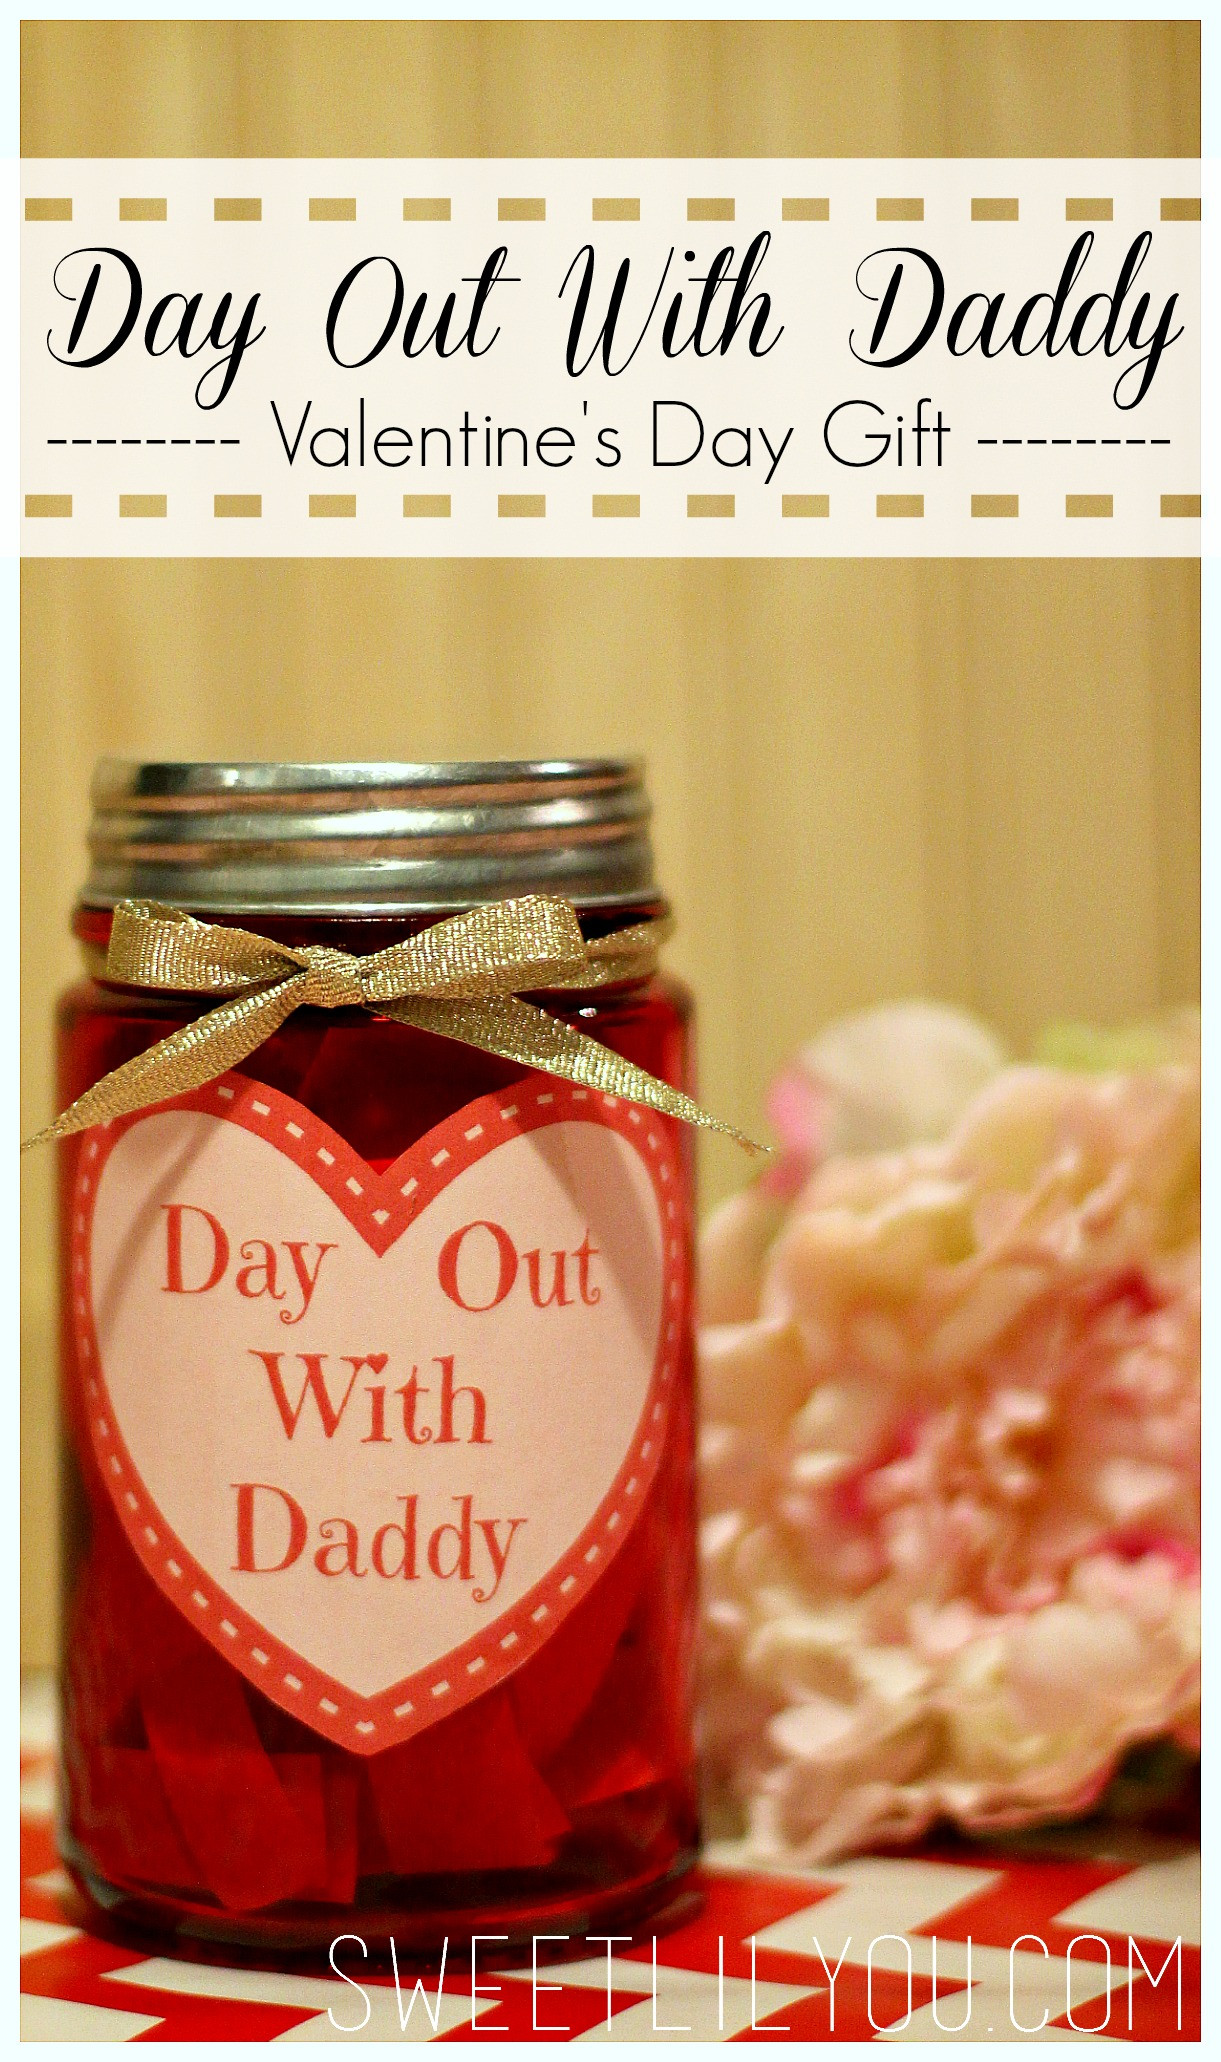 Valentines Gift Ideas For Dad
 Day Out With Daddy Jar Valentine s Day Gift for Dad